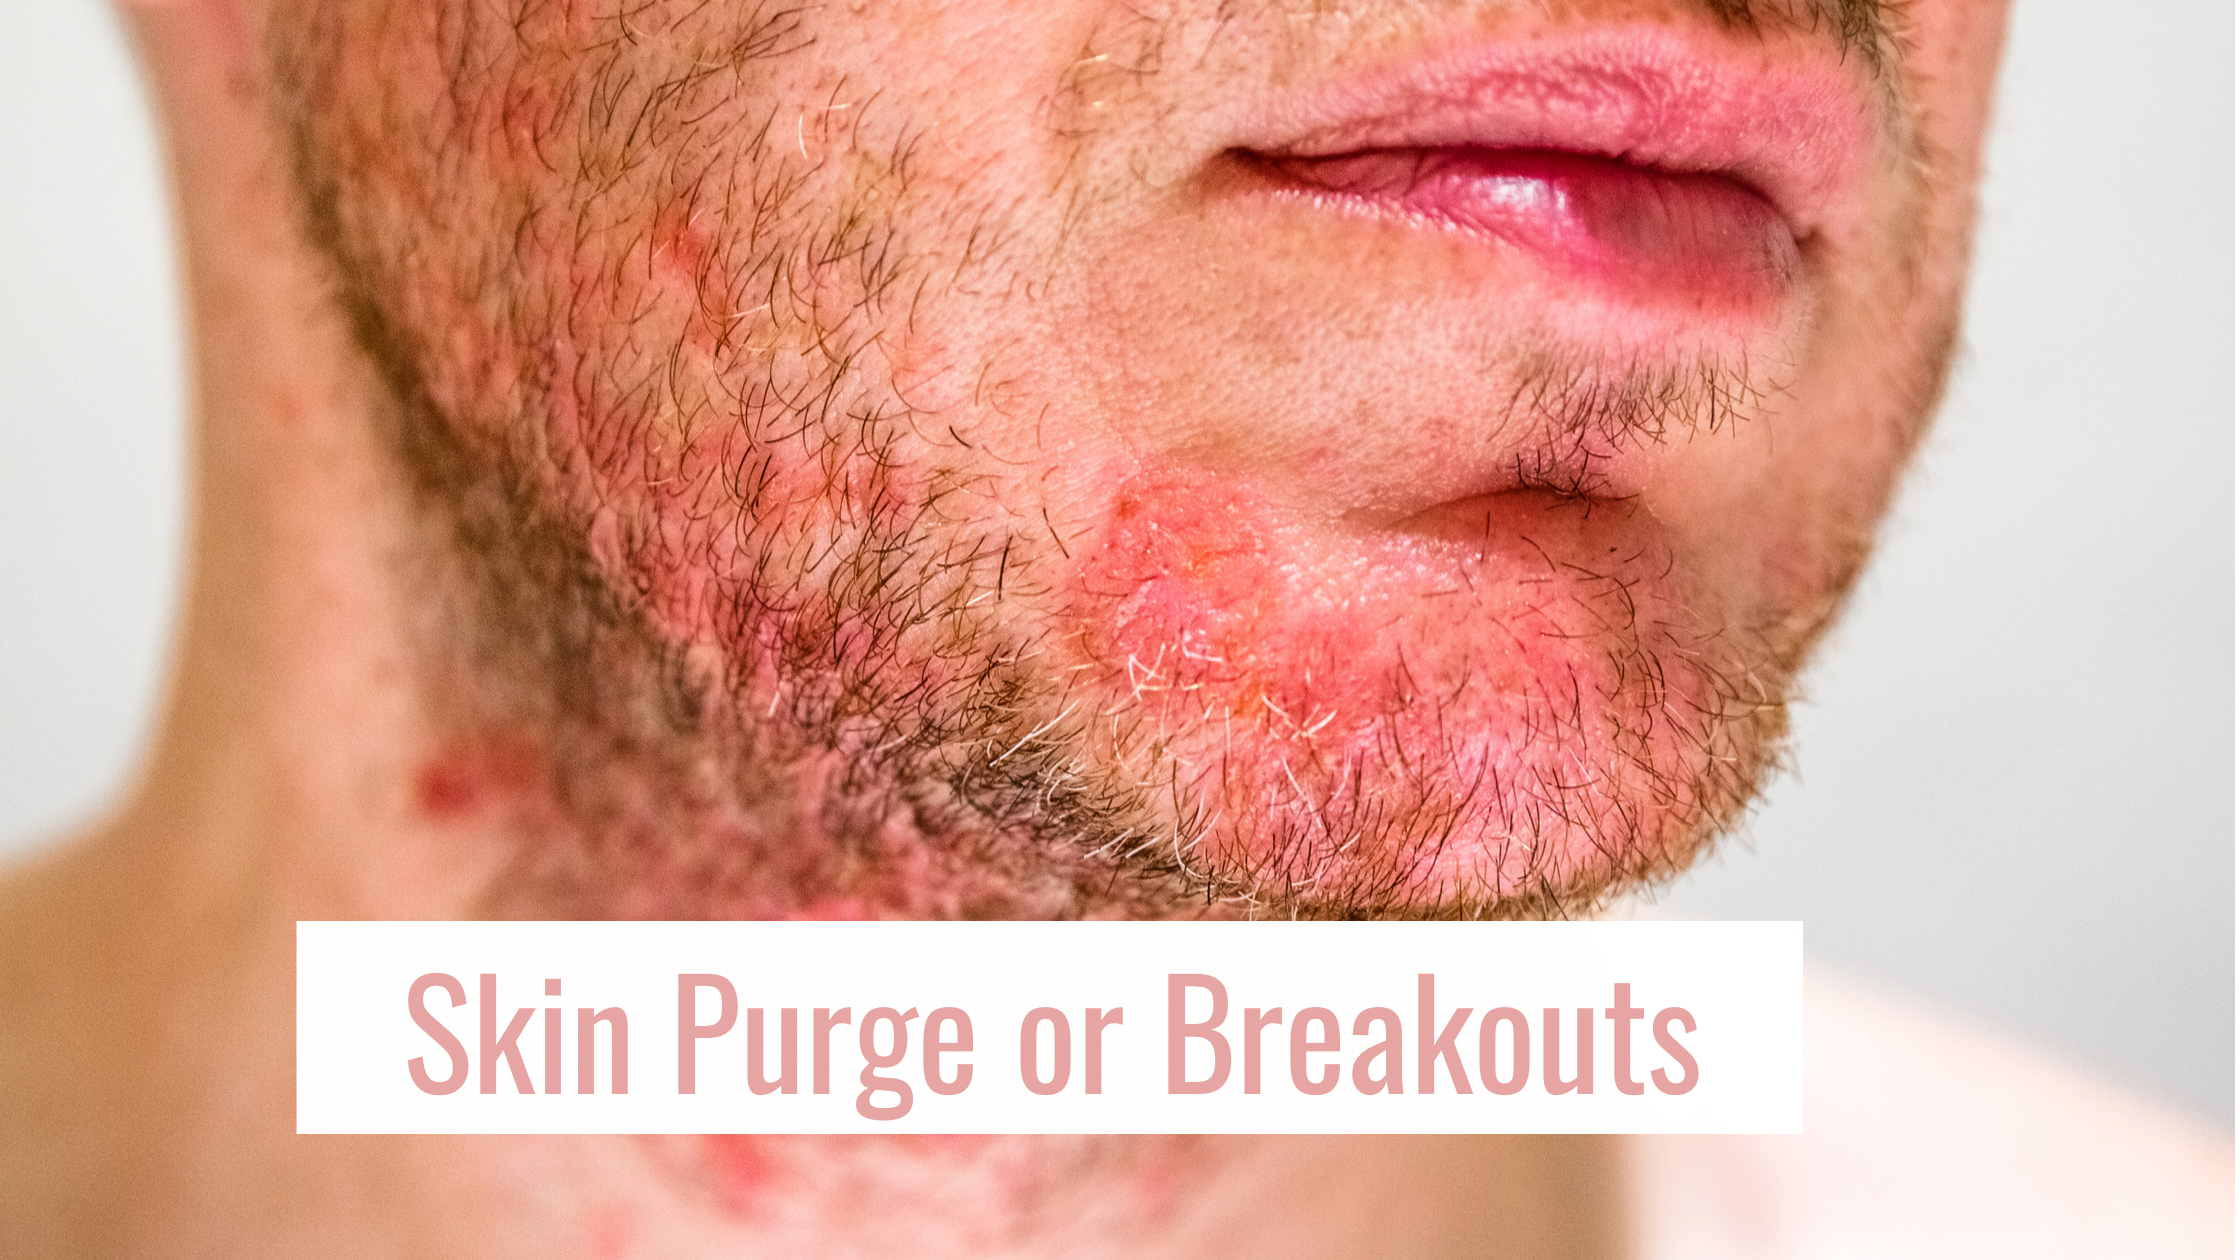 How to tell if your skin is purging or breaking out